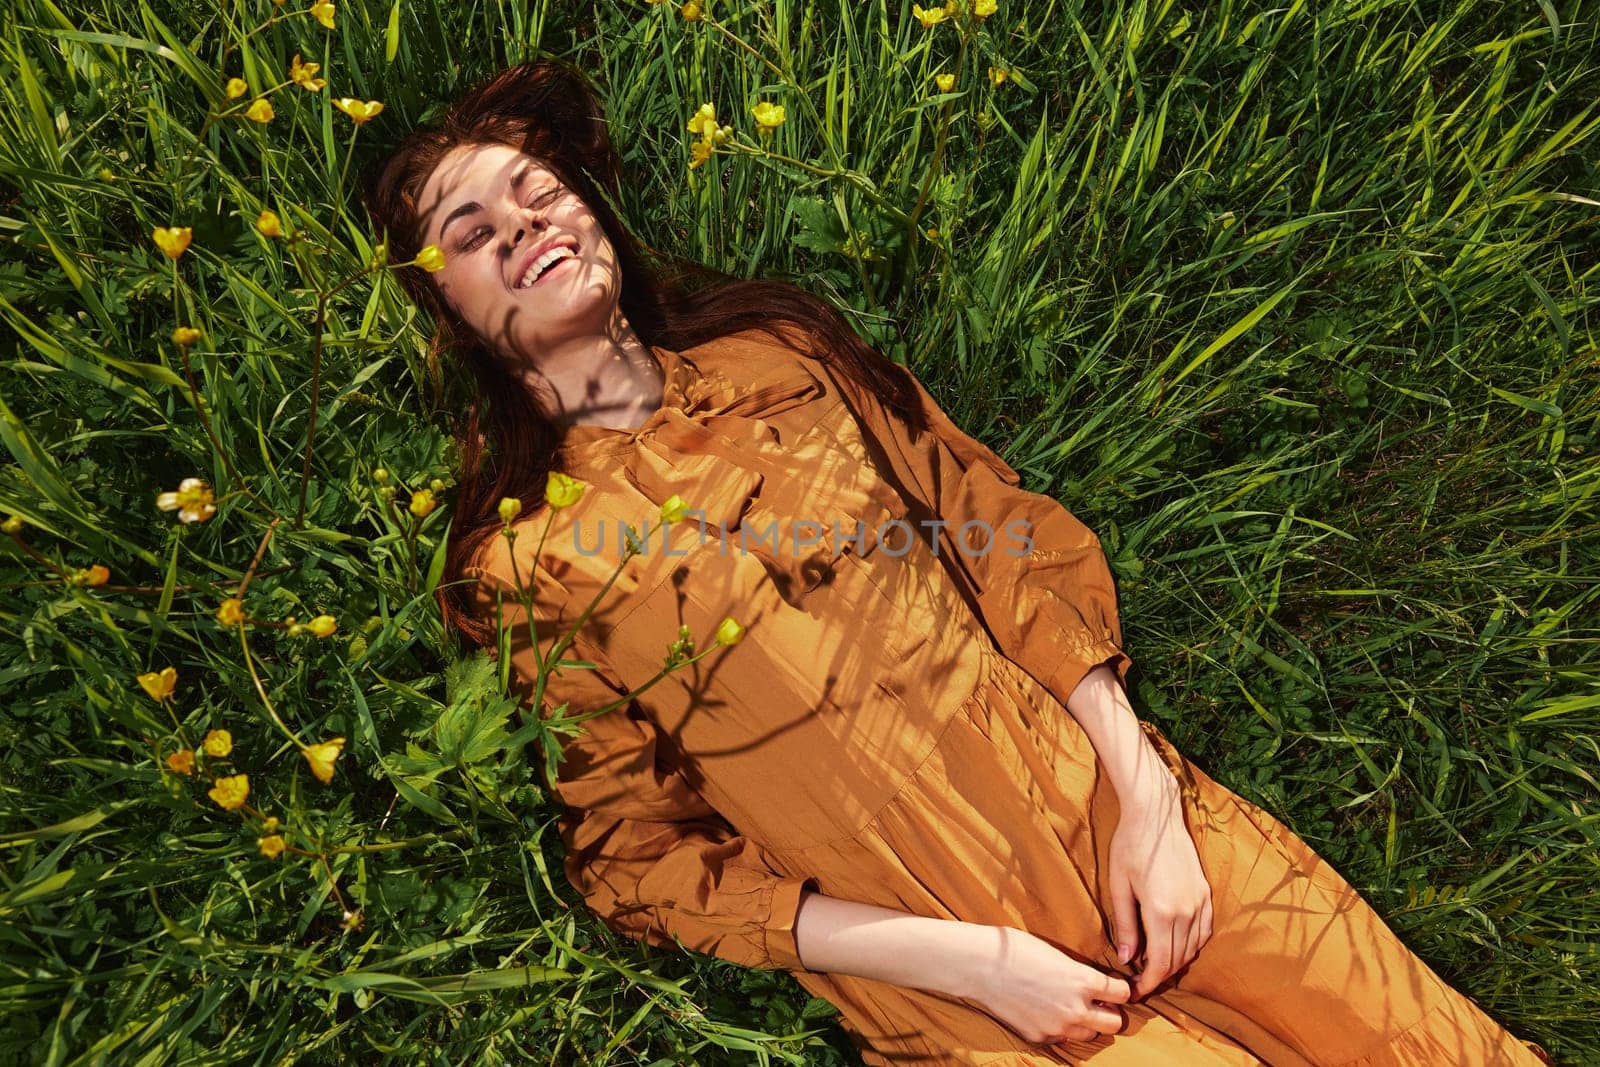 a calm woman with long red hair lies in a green field with yellow flowers, in an orange dress with her eyes closed, with a pleasant smile on her face, enjoying peace and recuperating by Vichizh